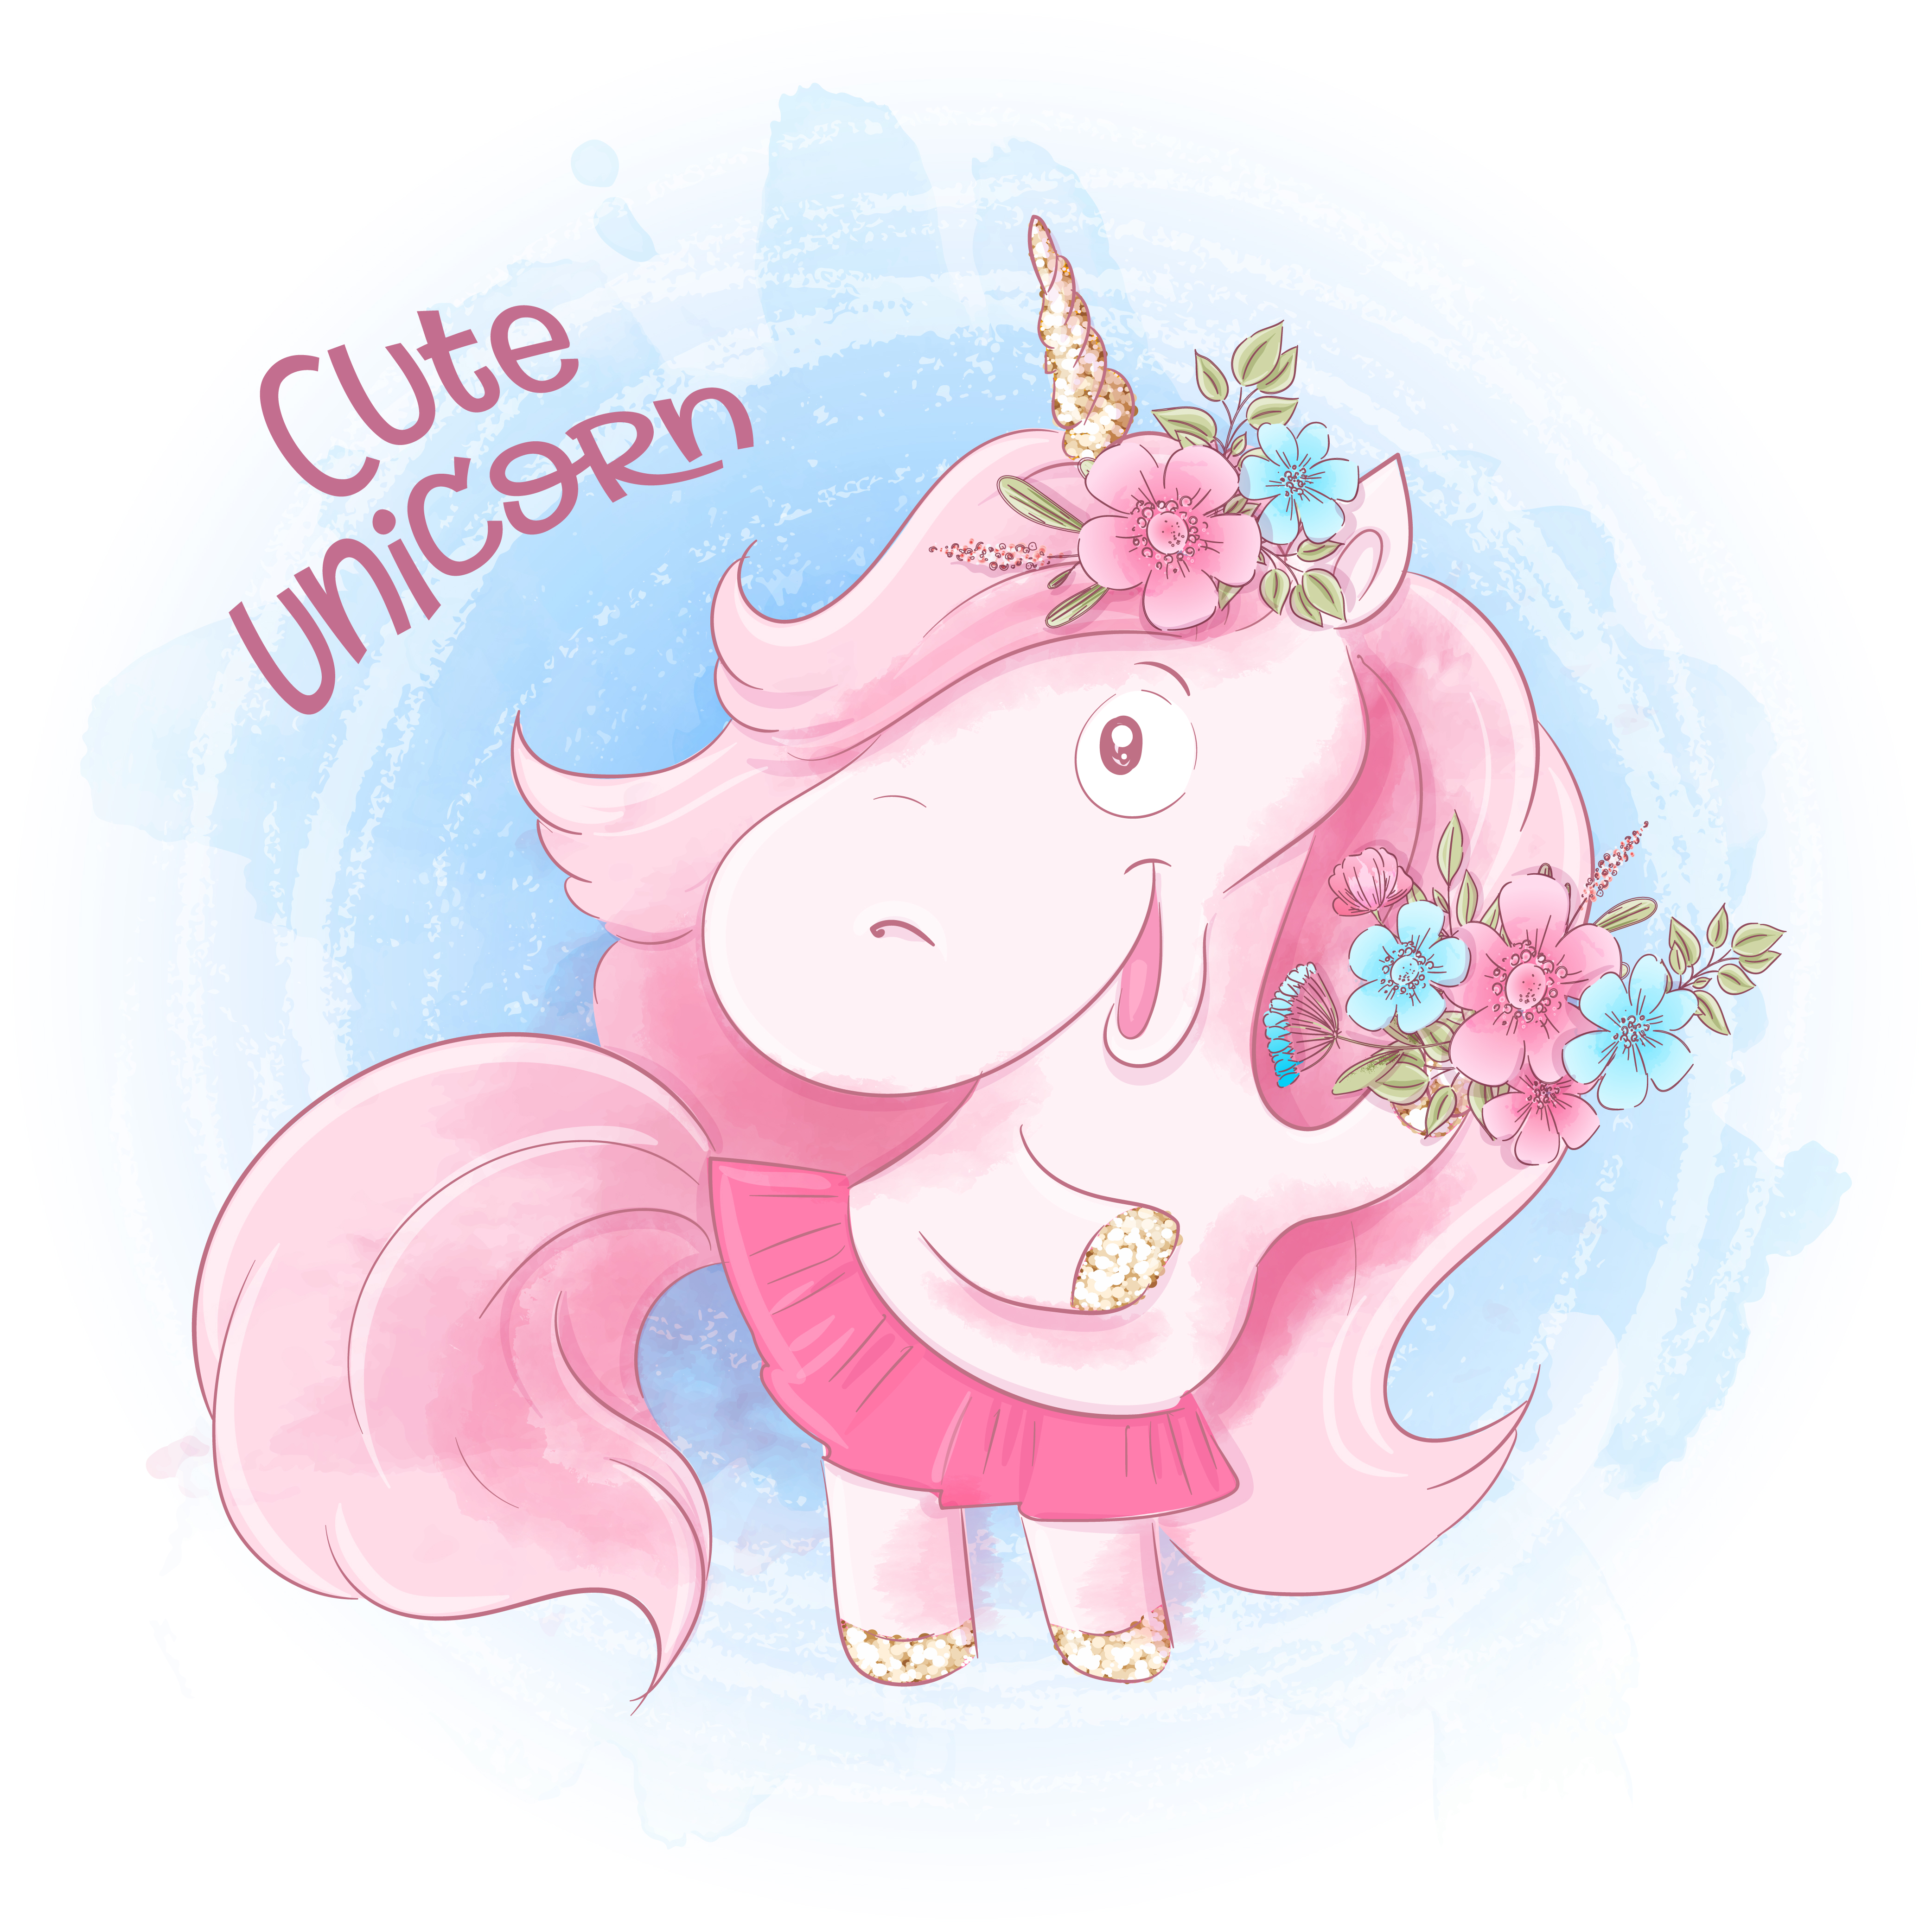 Cute Cartoon Unicorn On A Watercolor Background Download Free